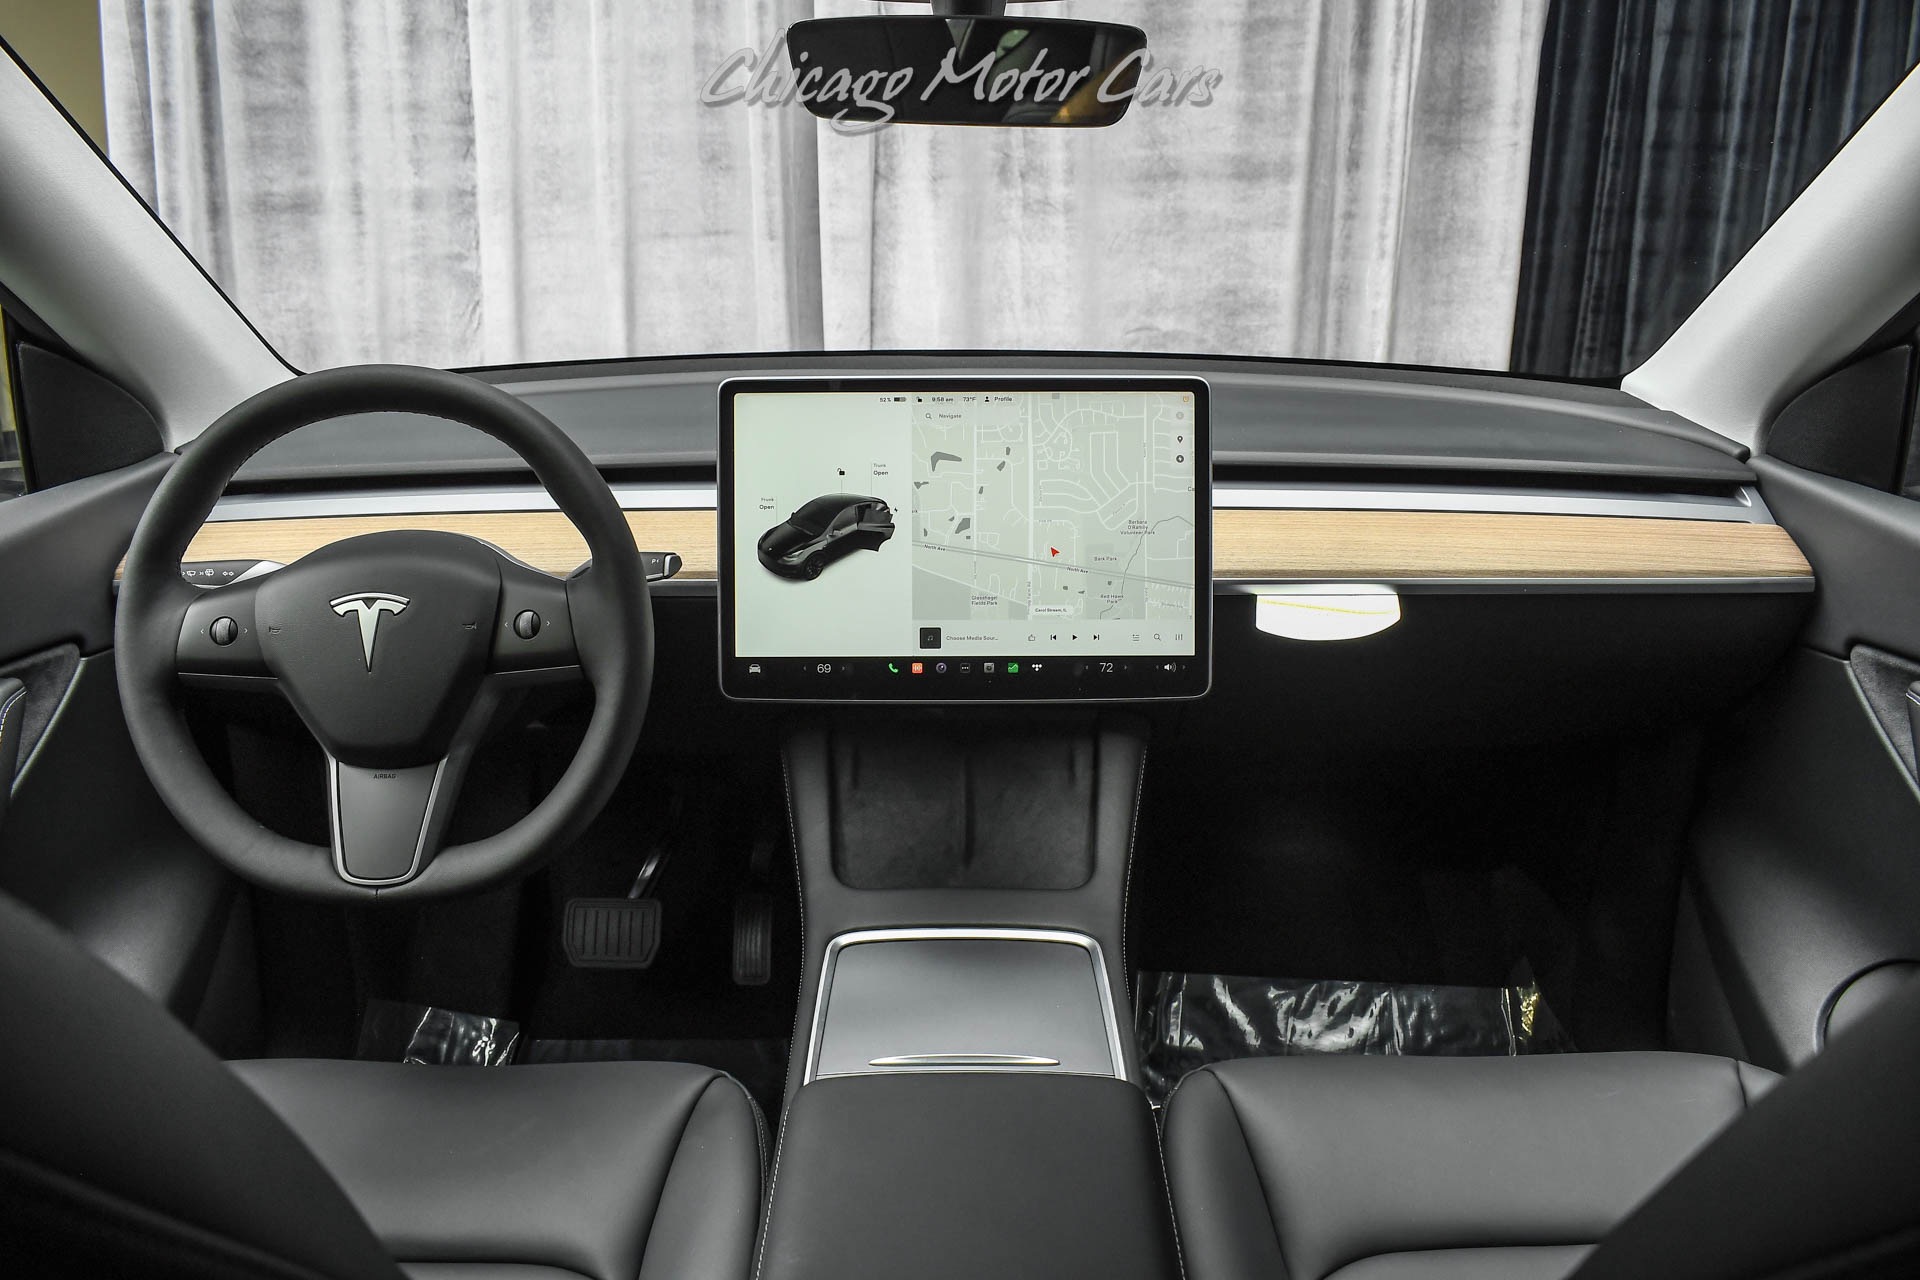 Used-2022-Tesla-Model-Y-Long-Range-AWD-SUV-Solid-Black-Autopilot-Induction-Wheels-ONLY-50-Miles